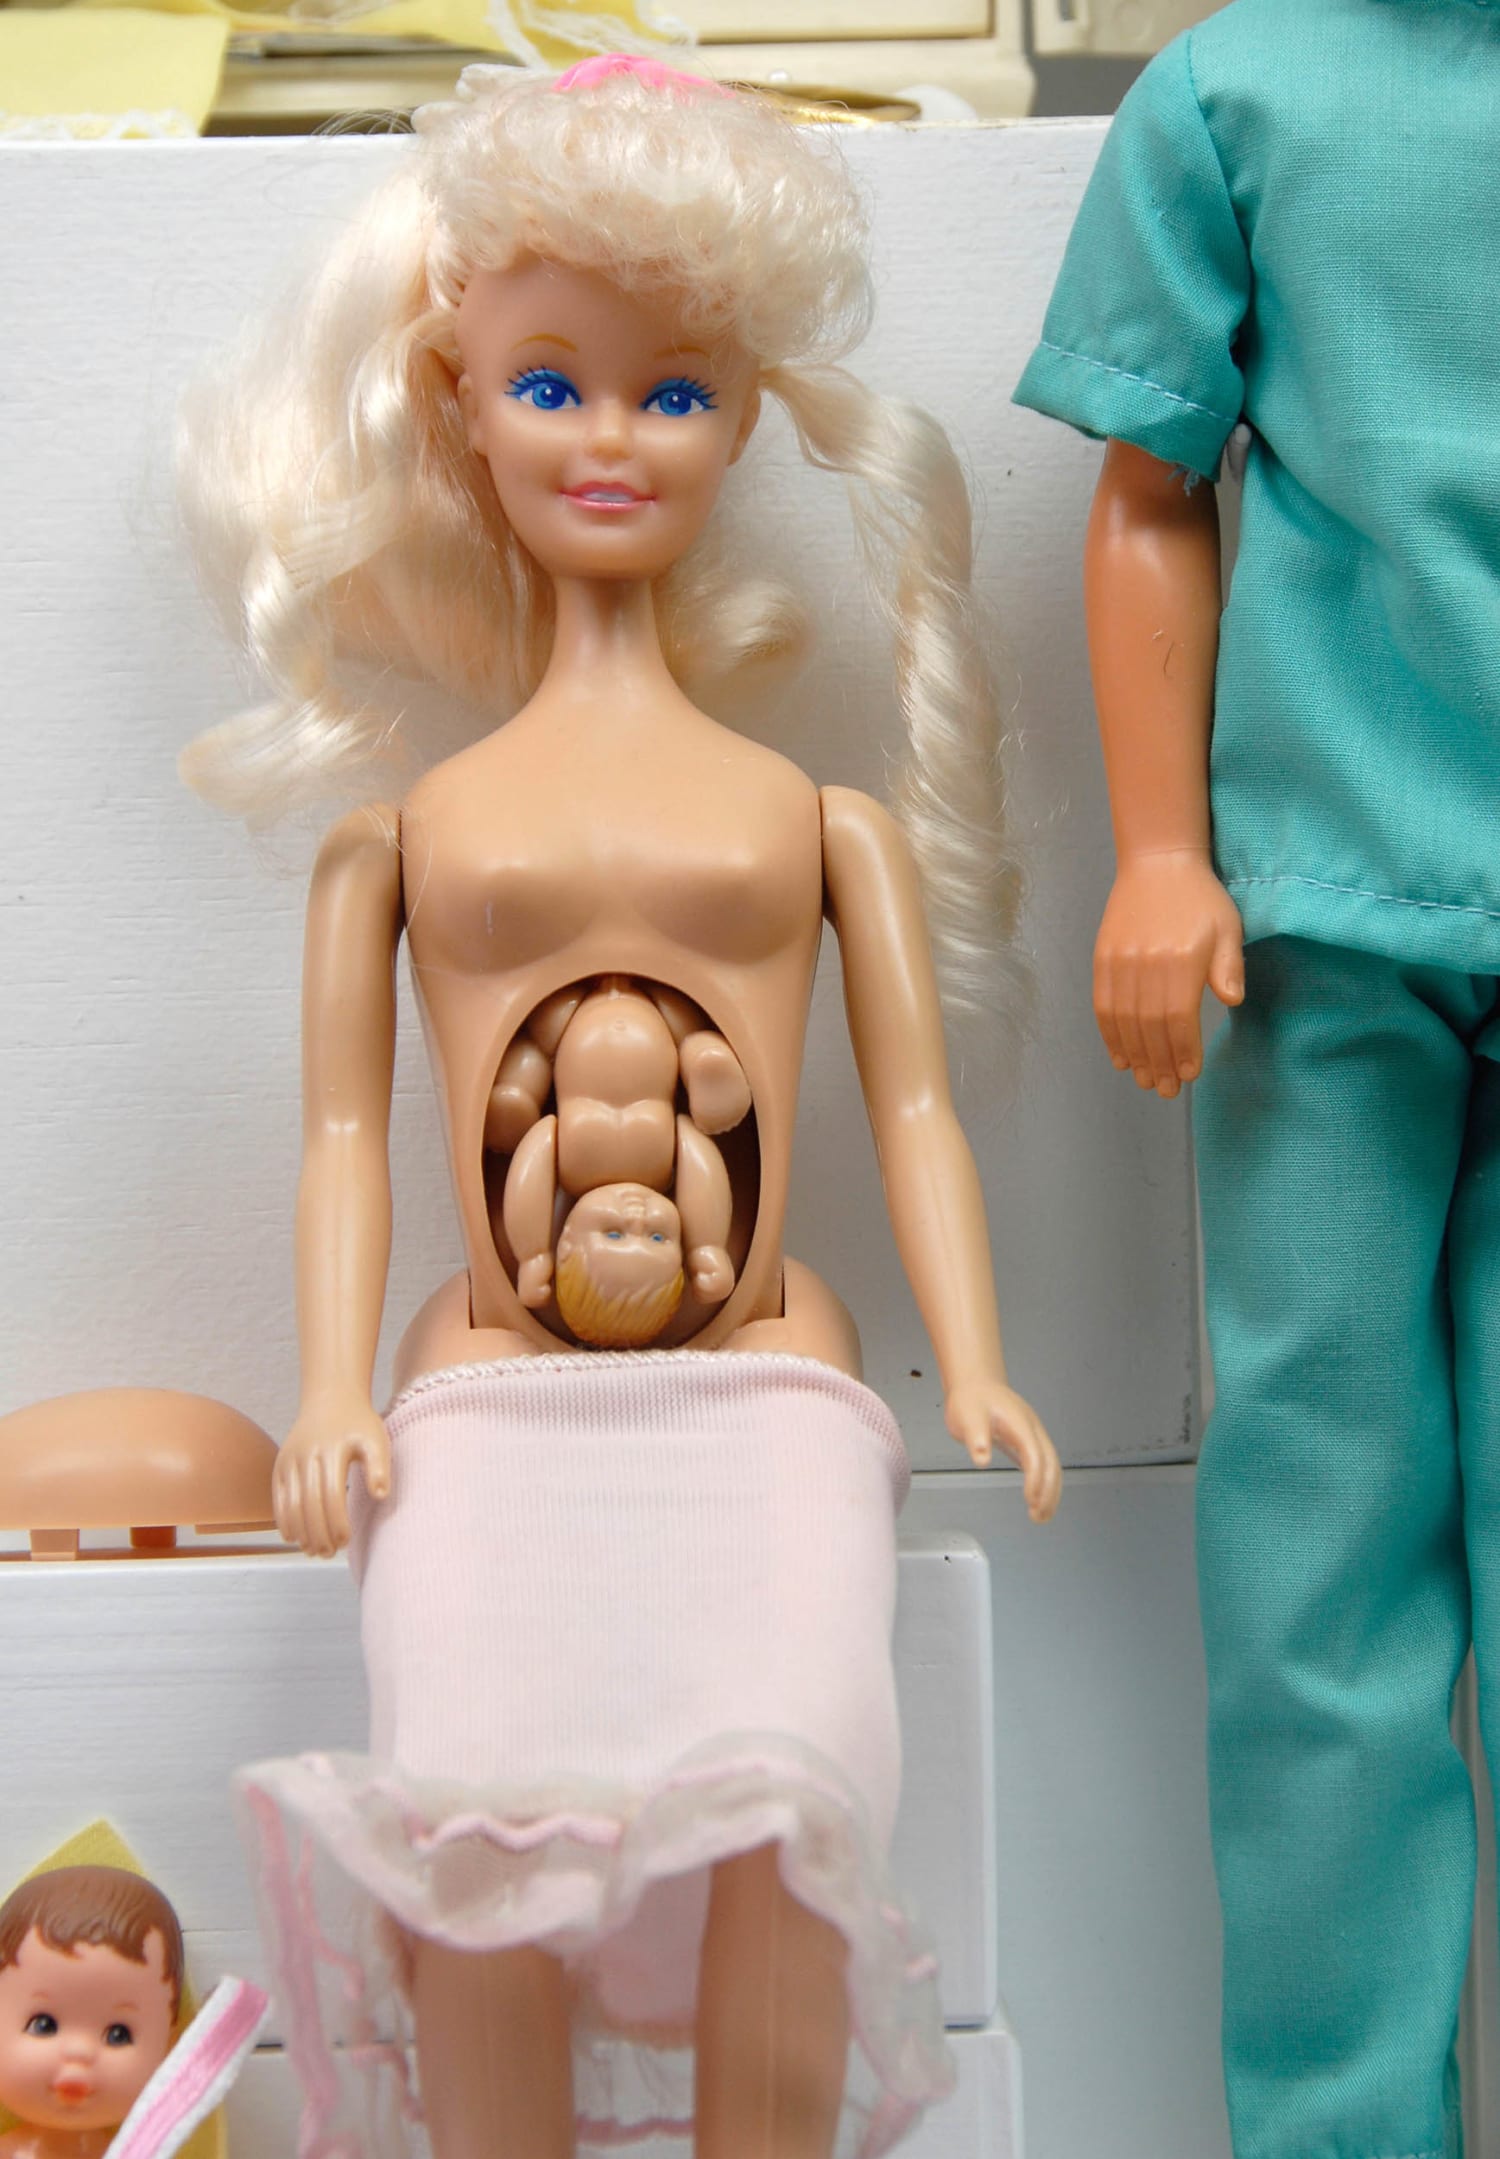 There Has Never Been A More Relatable Barbie Than 'Weird Barbie